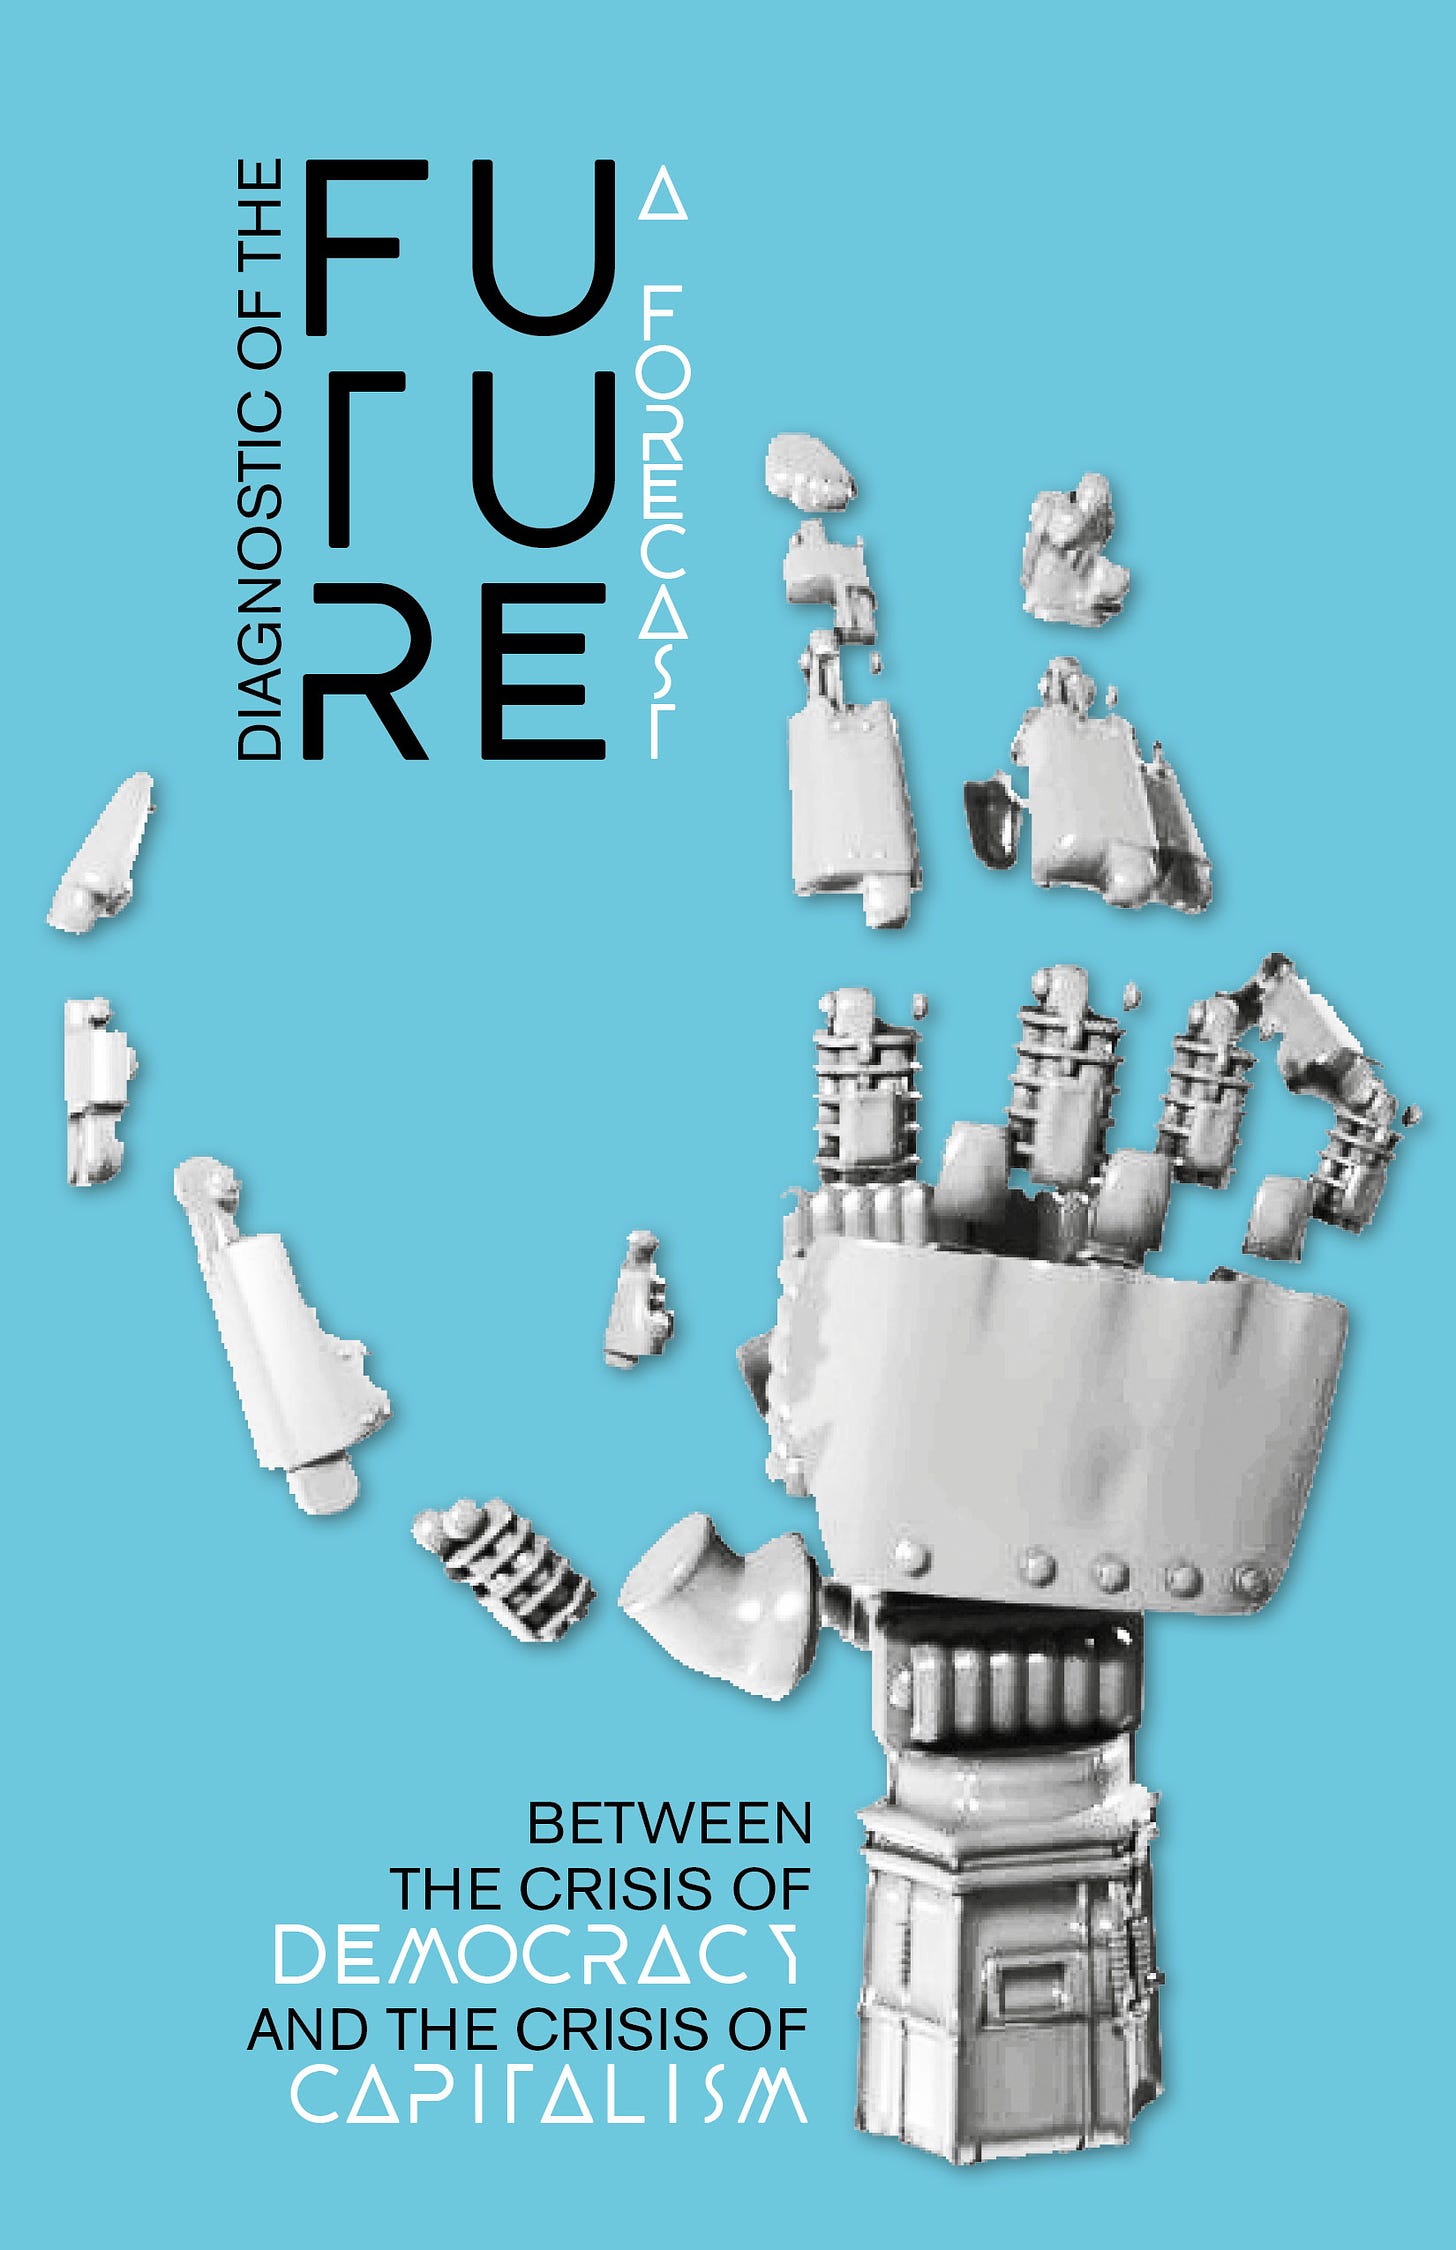 Diagnostic of the Future: cover of CrimethInc edition of the text